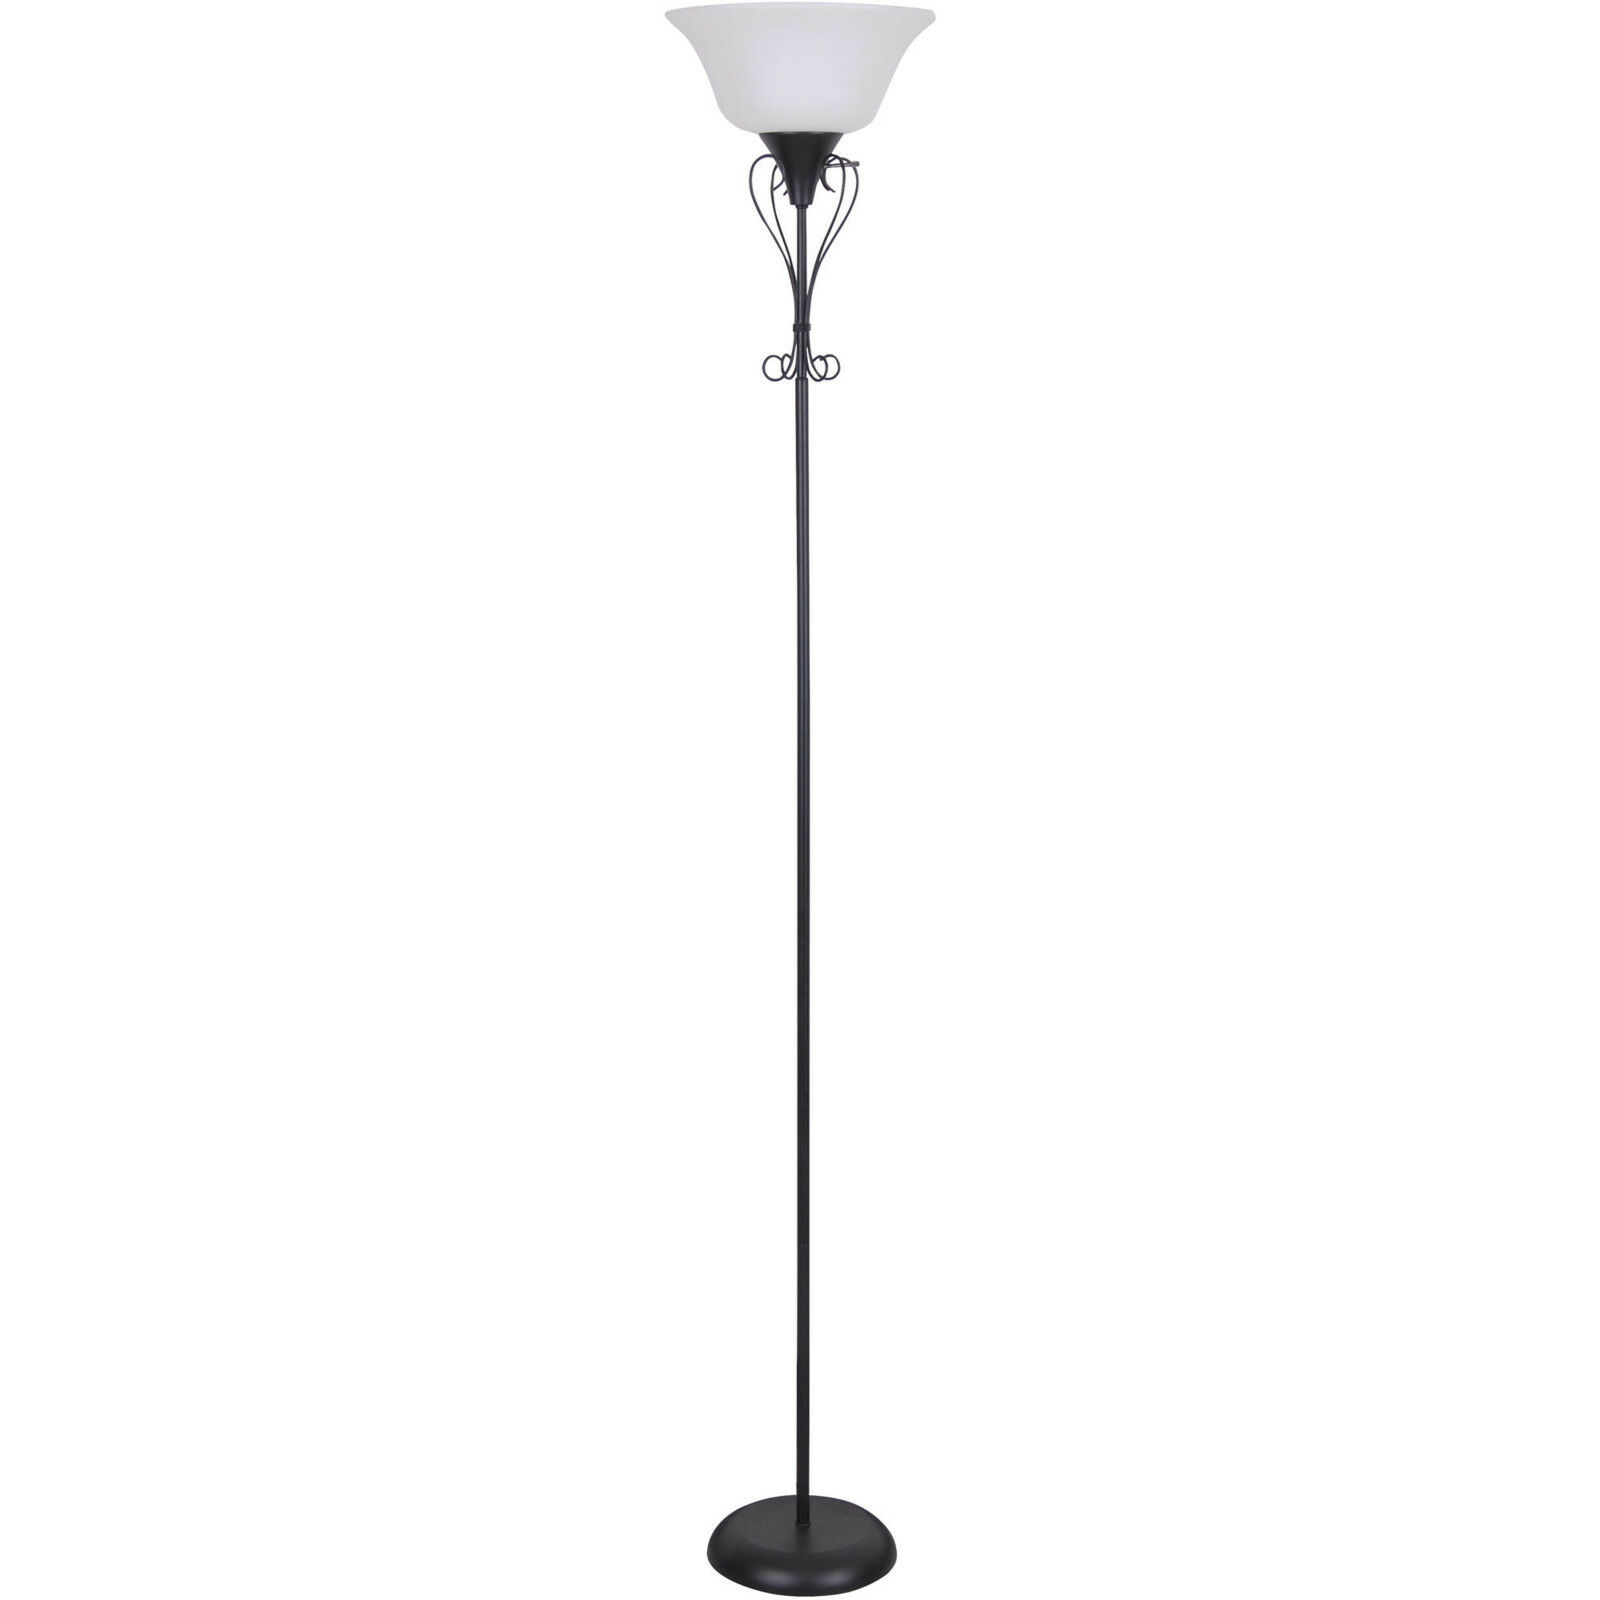 Mainstays 71 Scroll Floor Lamp Black Finish Cfl Bulb Included pertaining to proportions 1600 X 1600